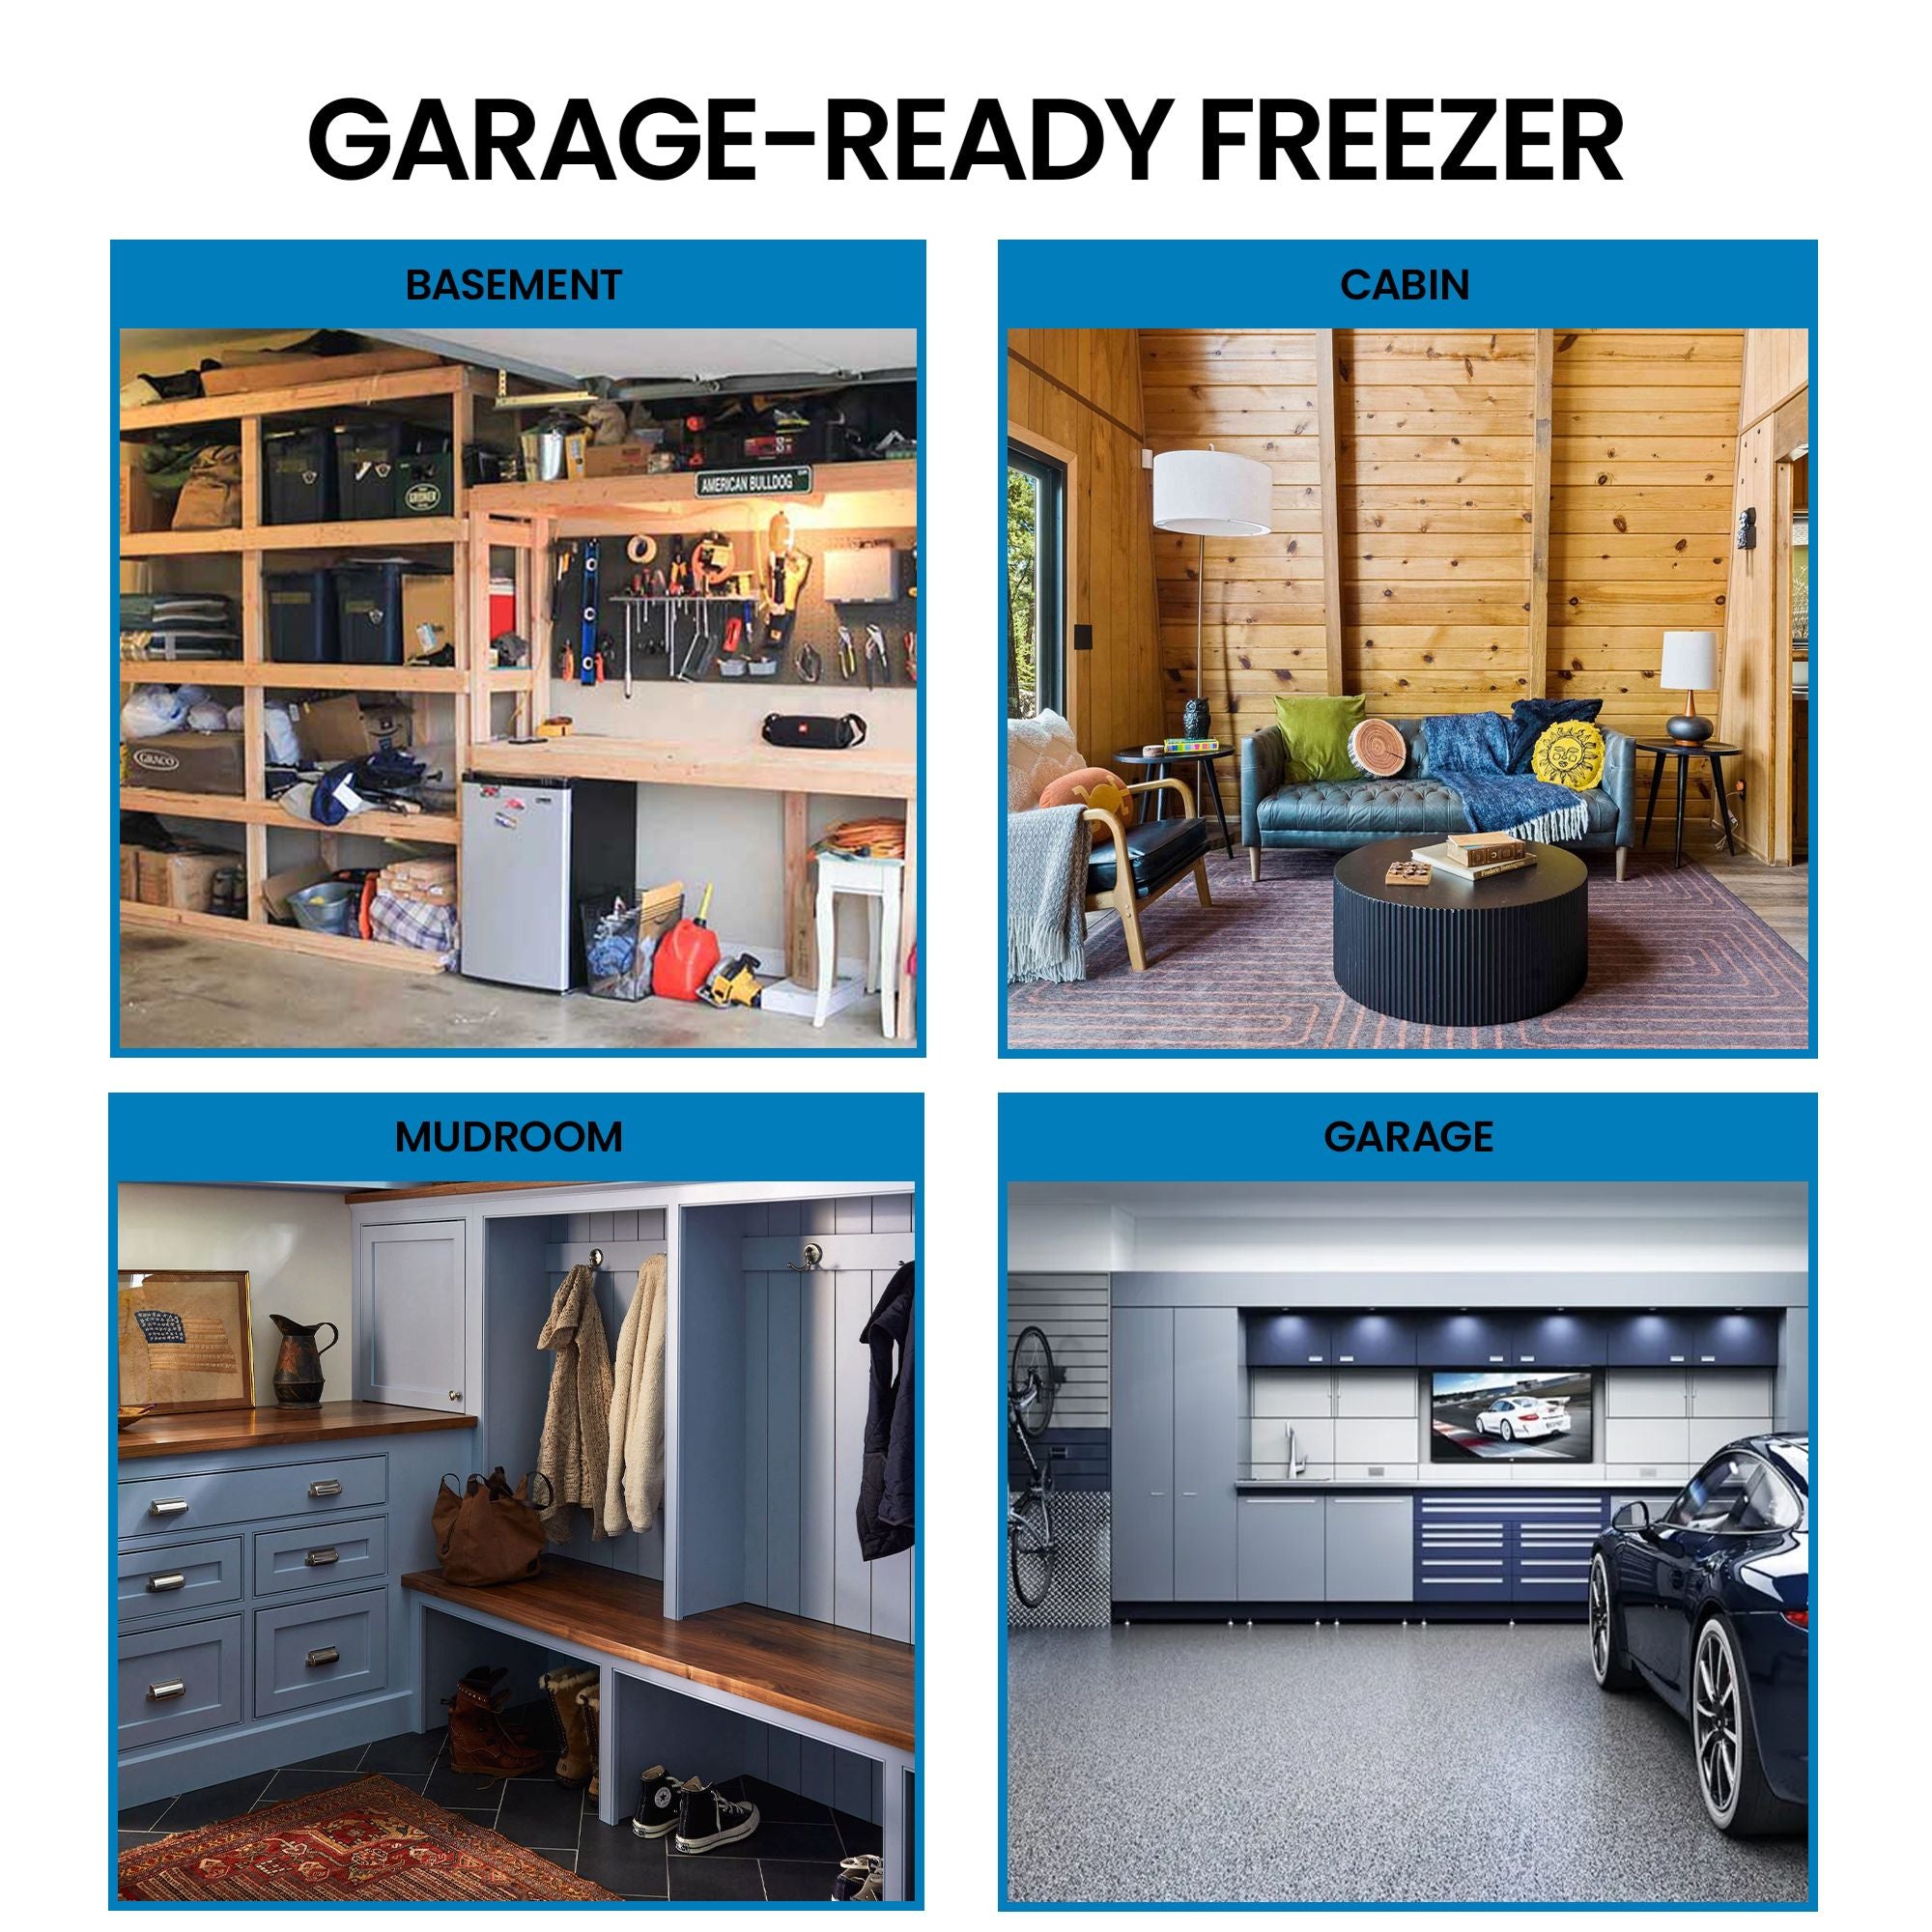 Four images show settings where the freezer could be used: Basement, cabin, mudroom, garage. Text above reads, "Garage-ready freezer"